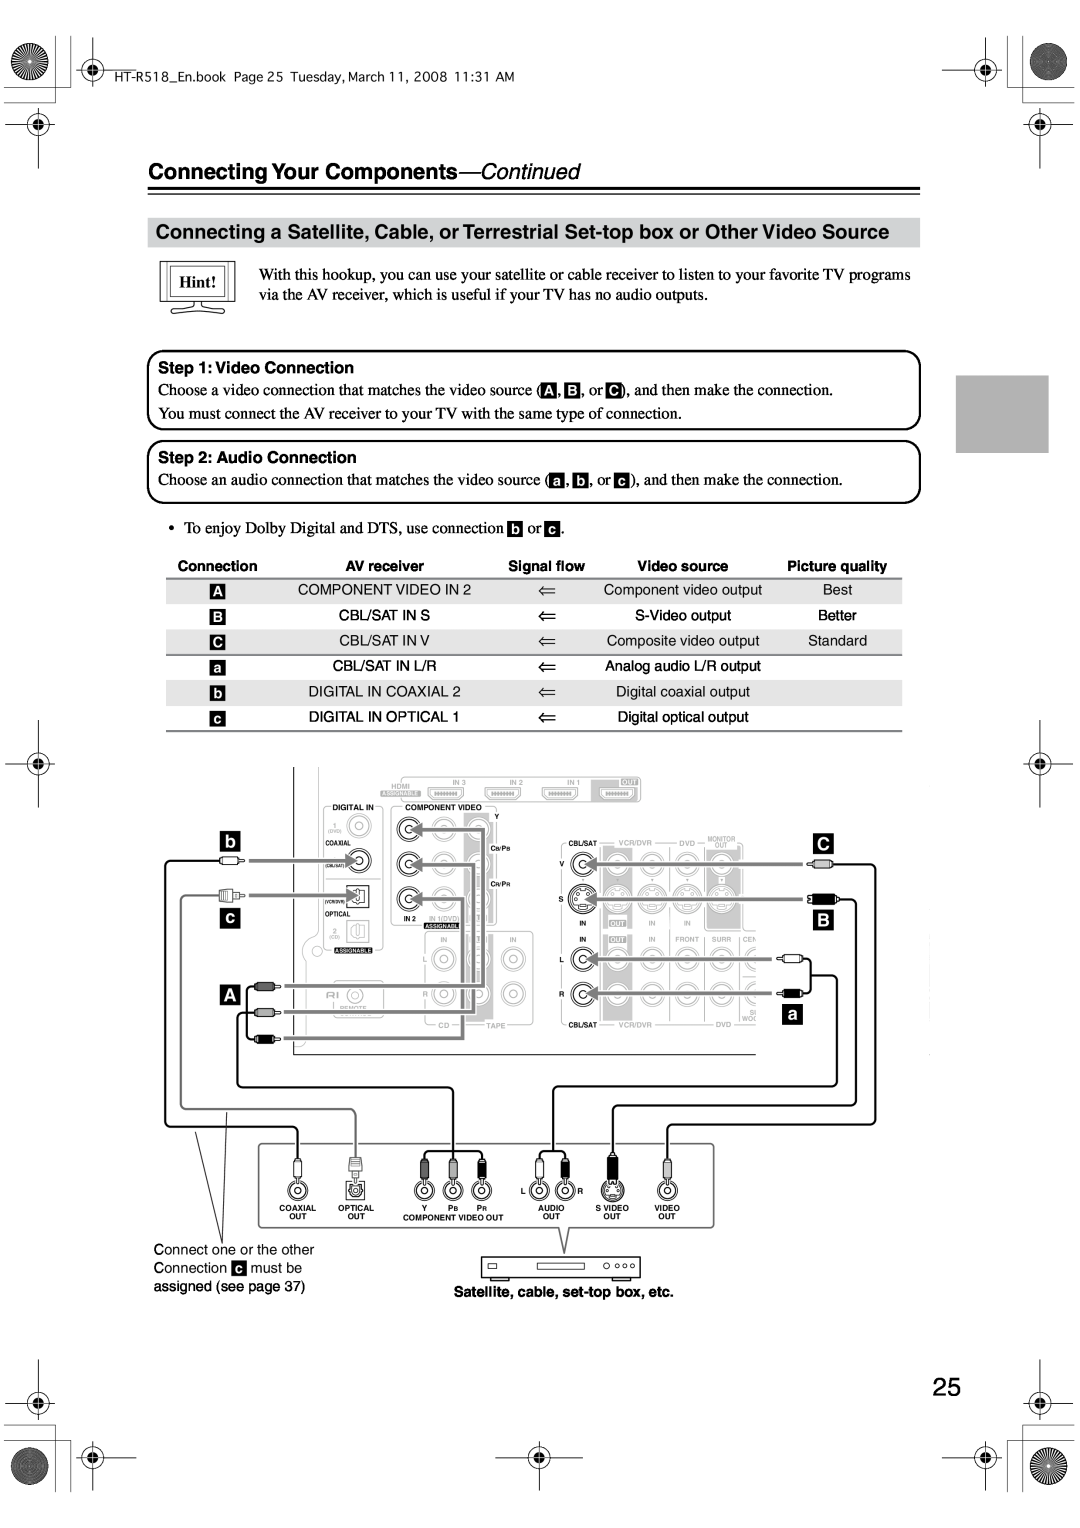 Onkyo HT-R518 instruction manual Connecting Your Components-Continued, b c A, Hint, Component Video In 